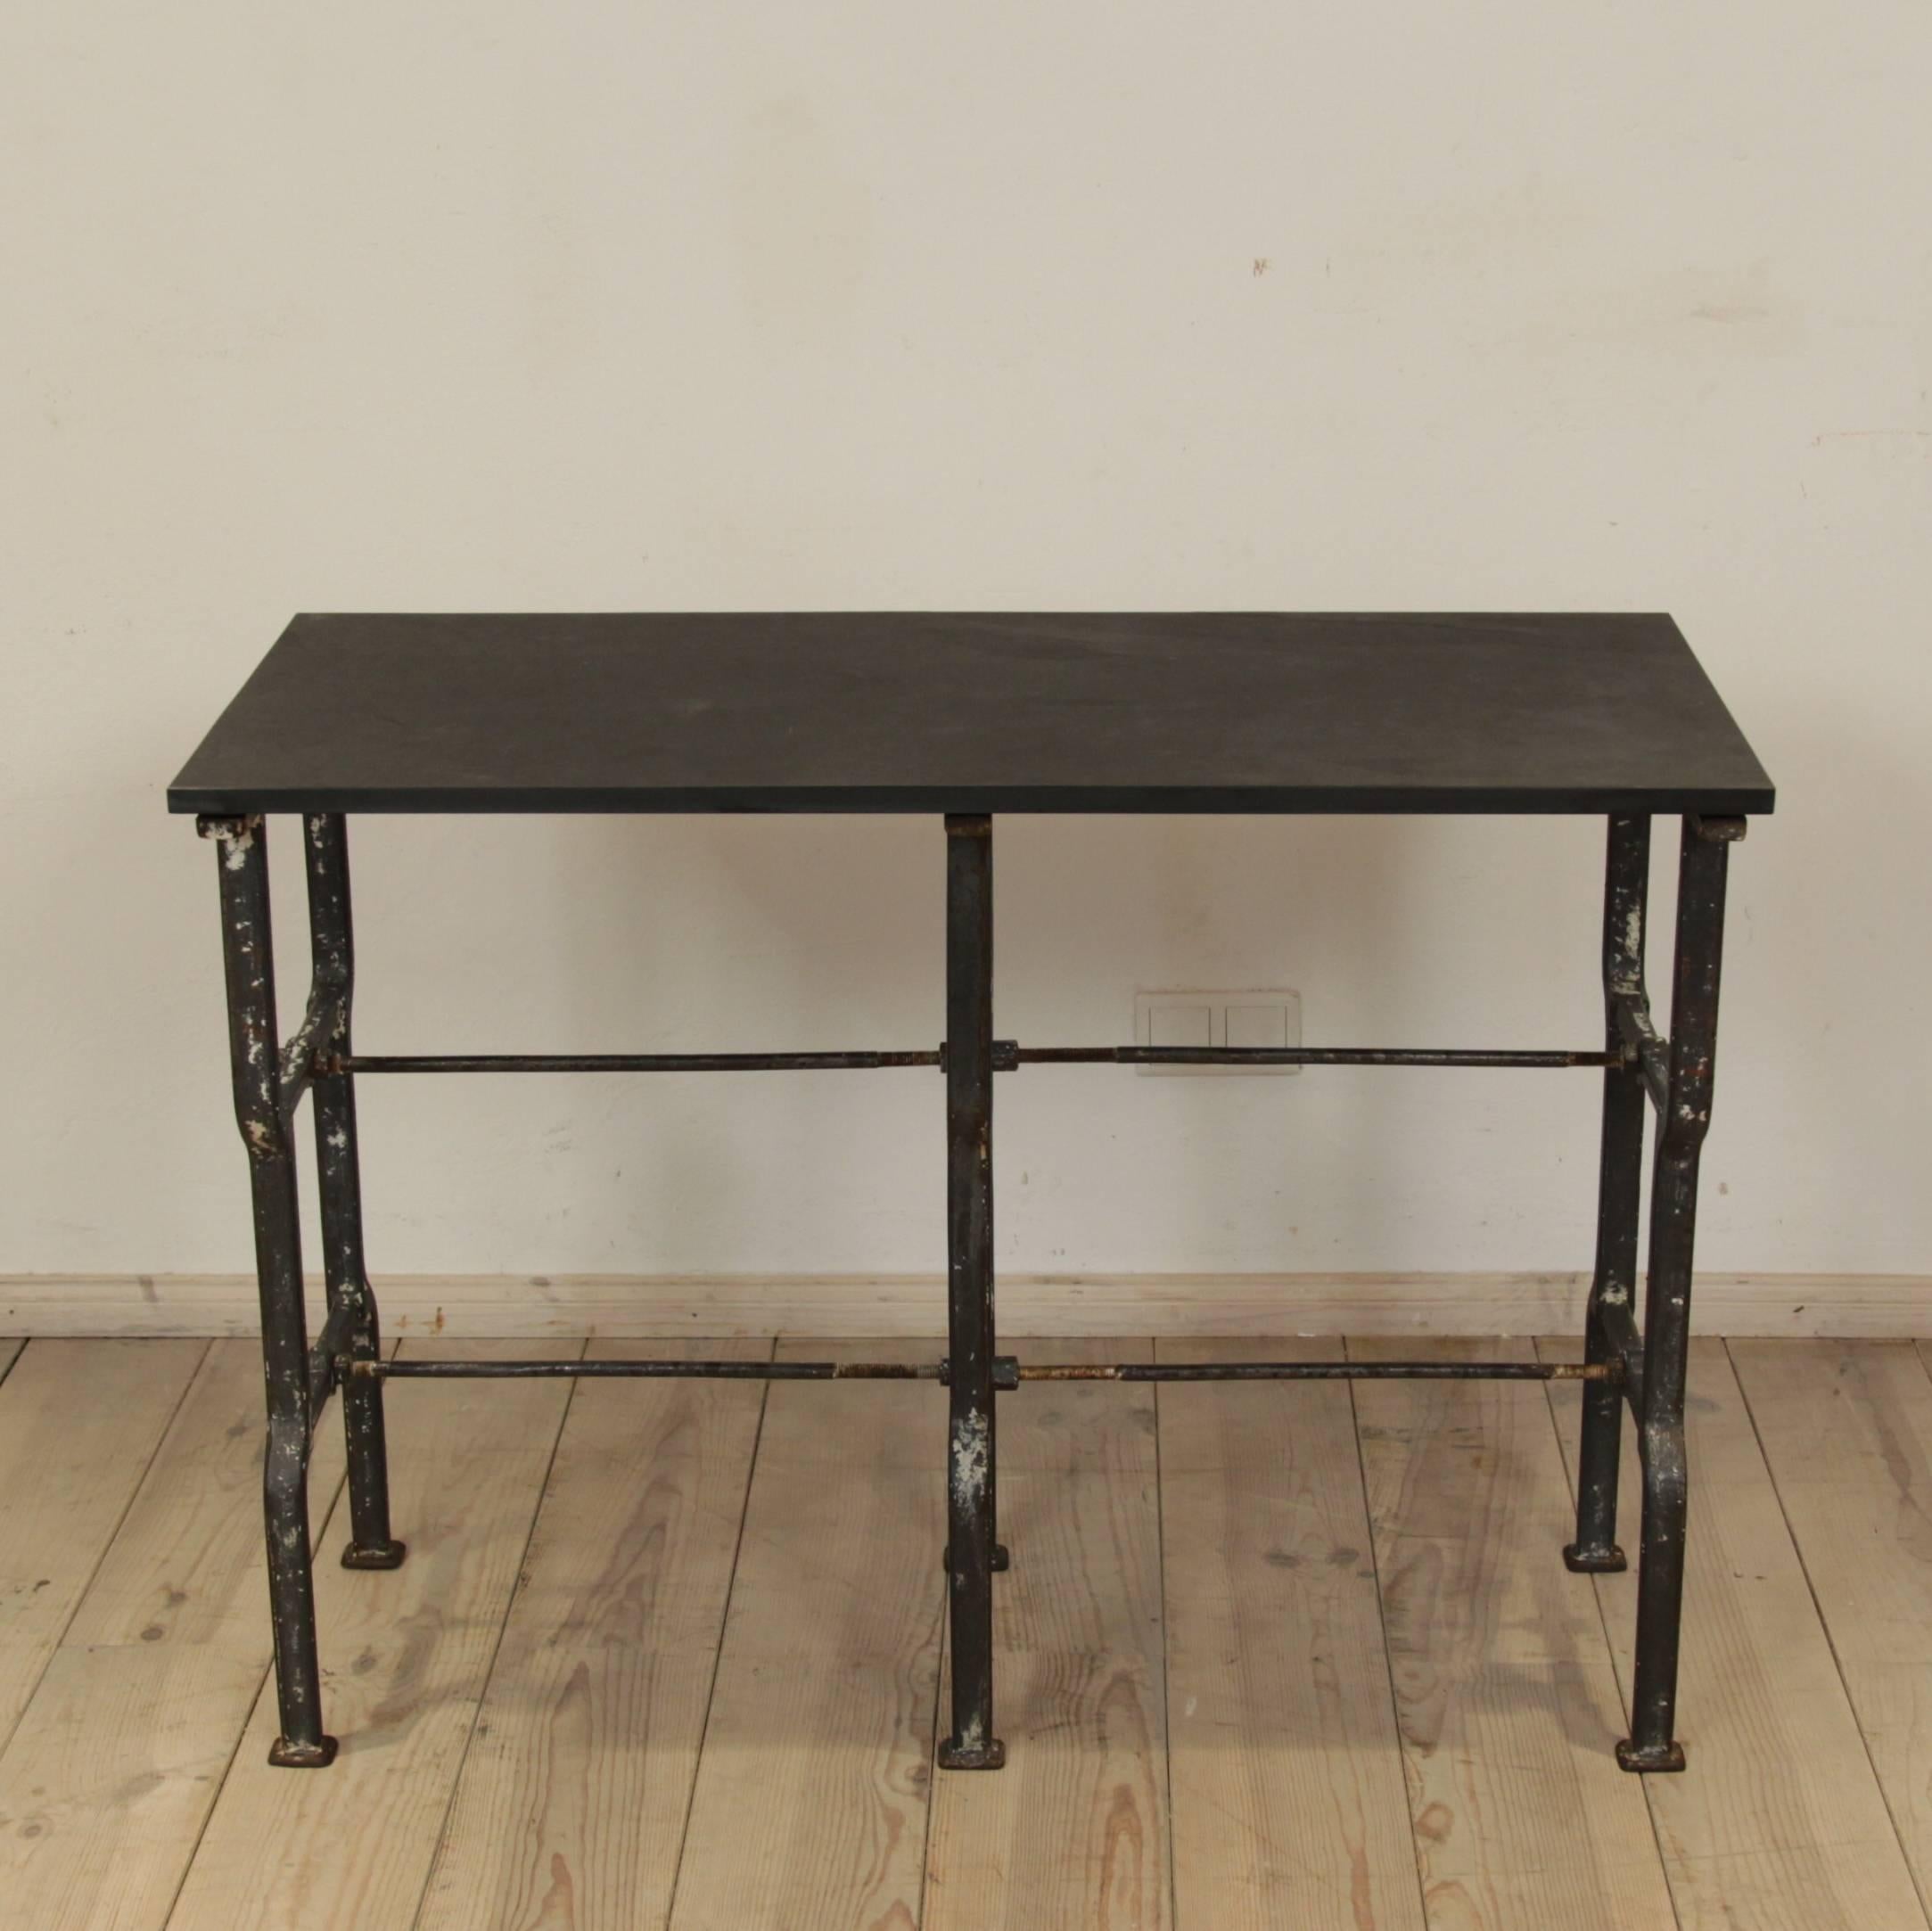 This former German Industrial table-base circa 1930 was converted into a elegant console table by adding a slate top.